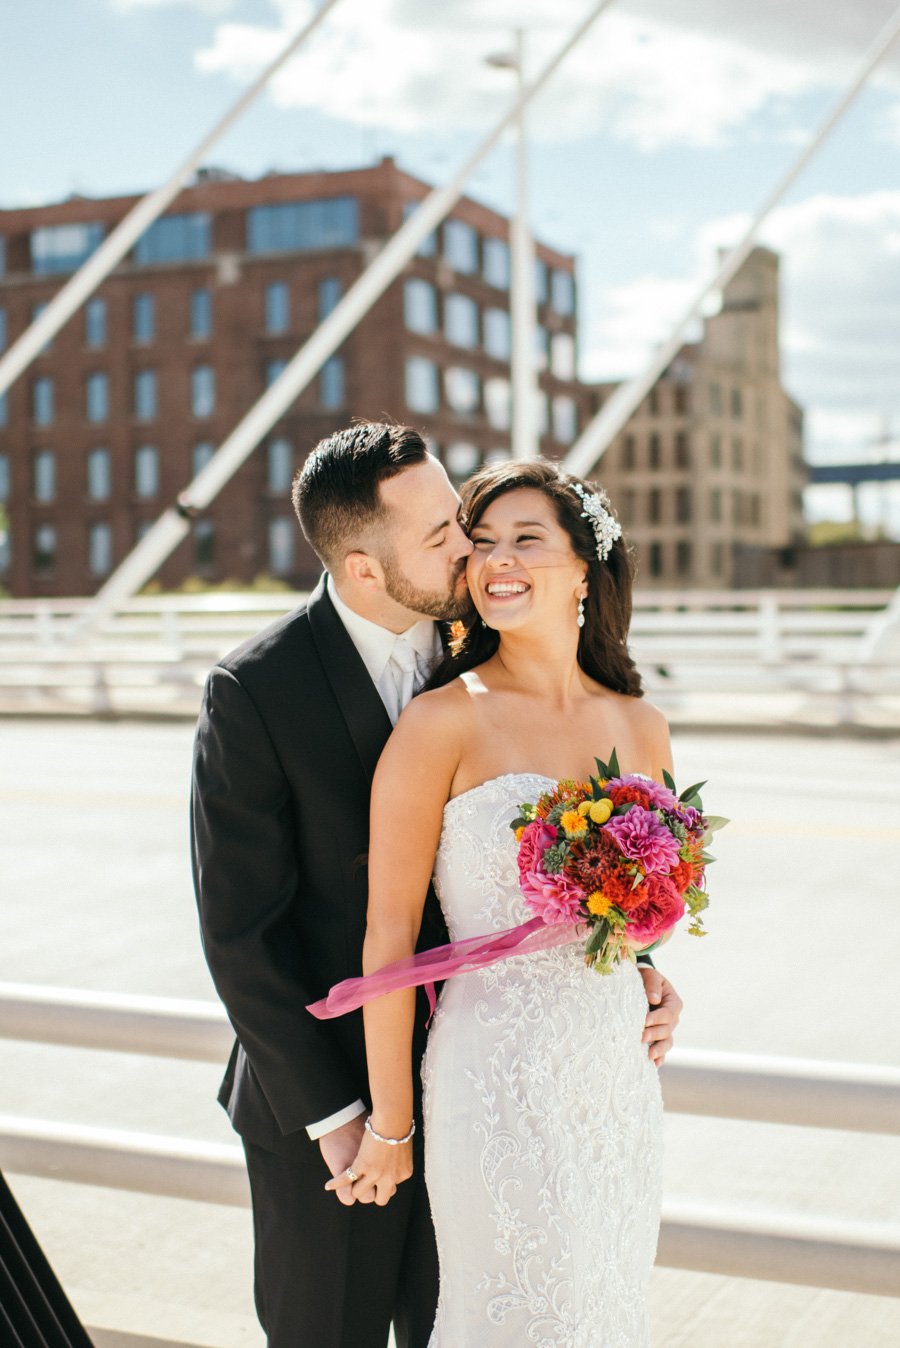 seven ways we threw tradition out the window to do our wedding our way via playswellwithbutter